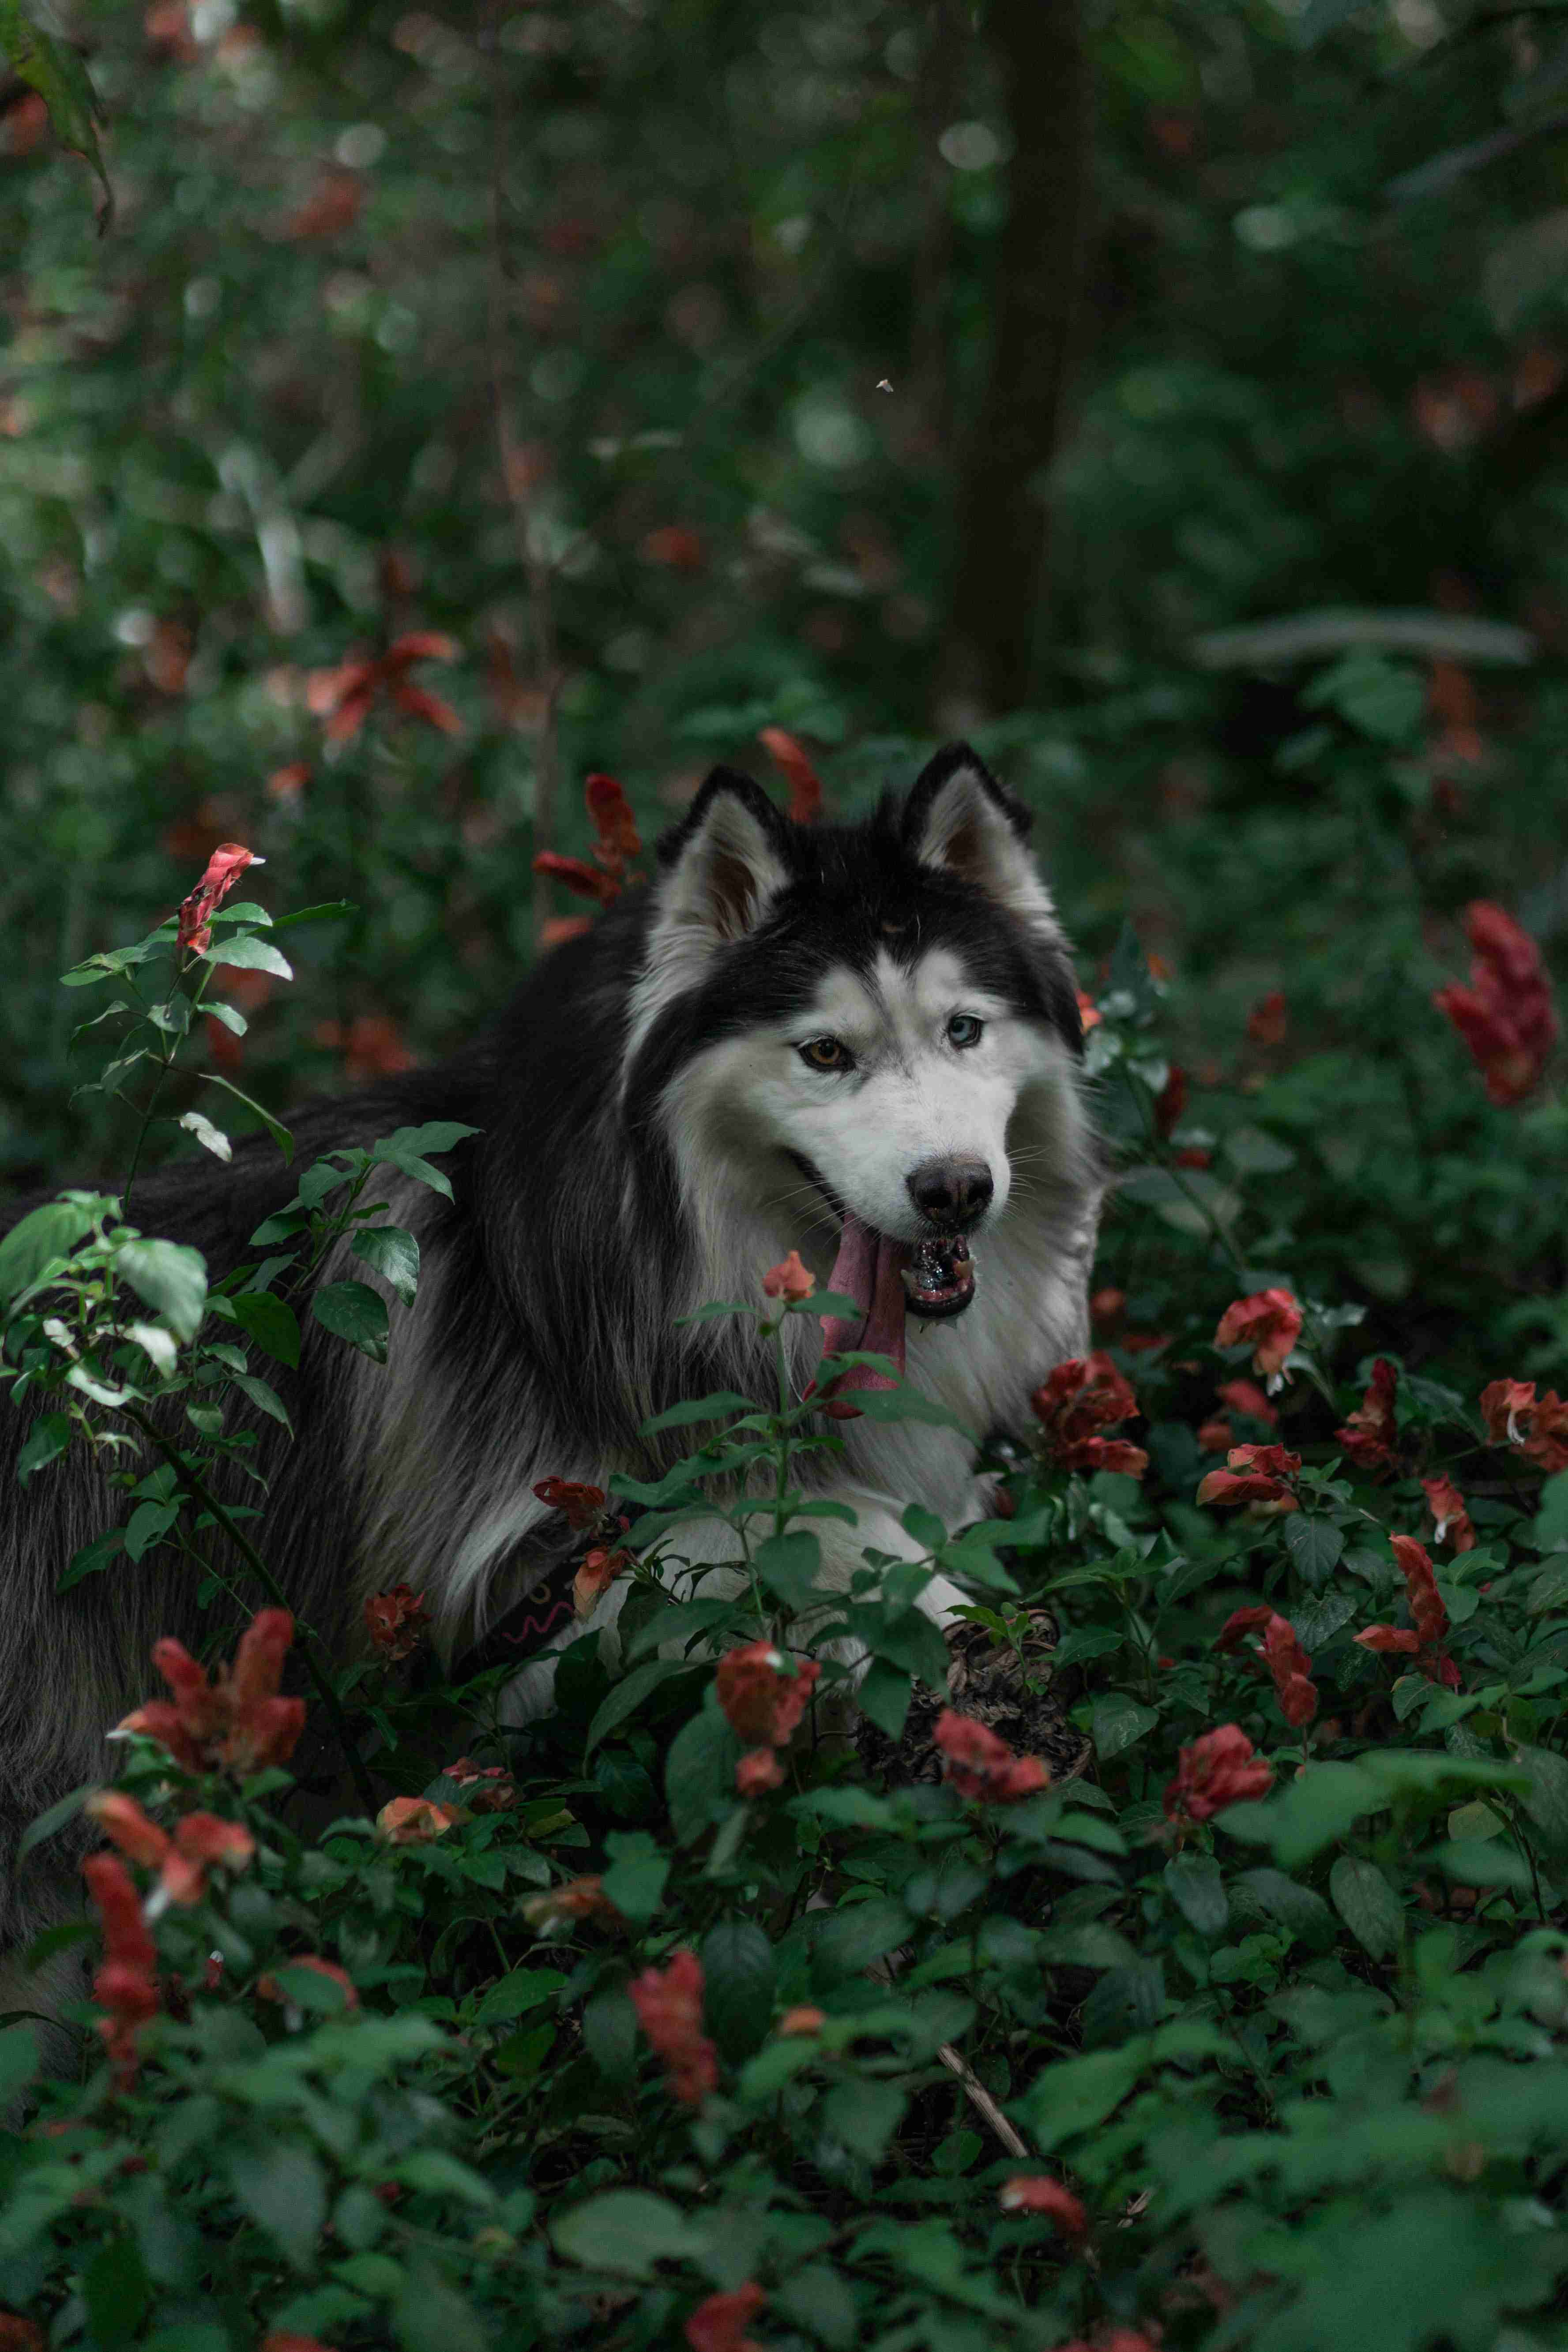 Rescuing Alaskan Malamutes: Discovering Dedicated Organizations for Adoption and Support